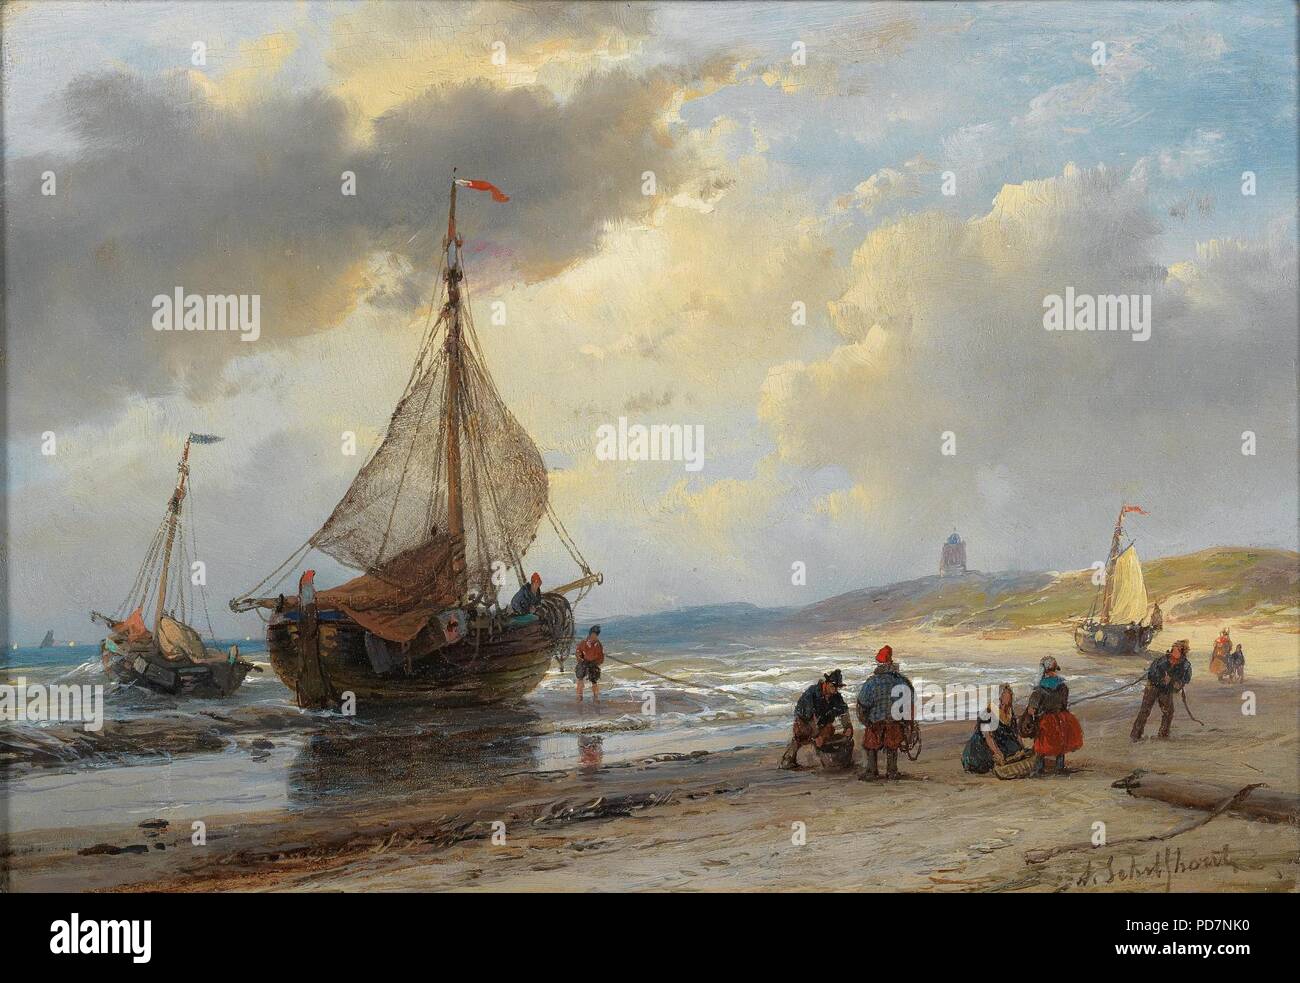 Andreas Schelfhout Am Strand. Stock Photo